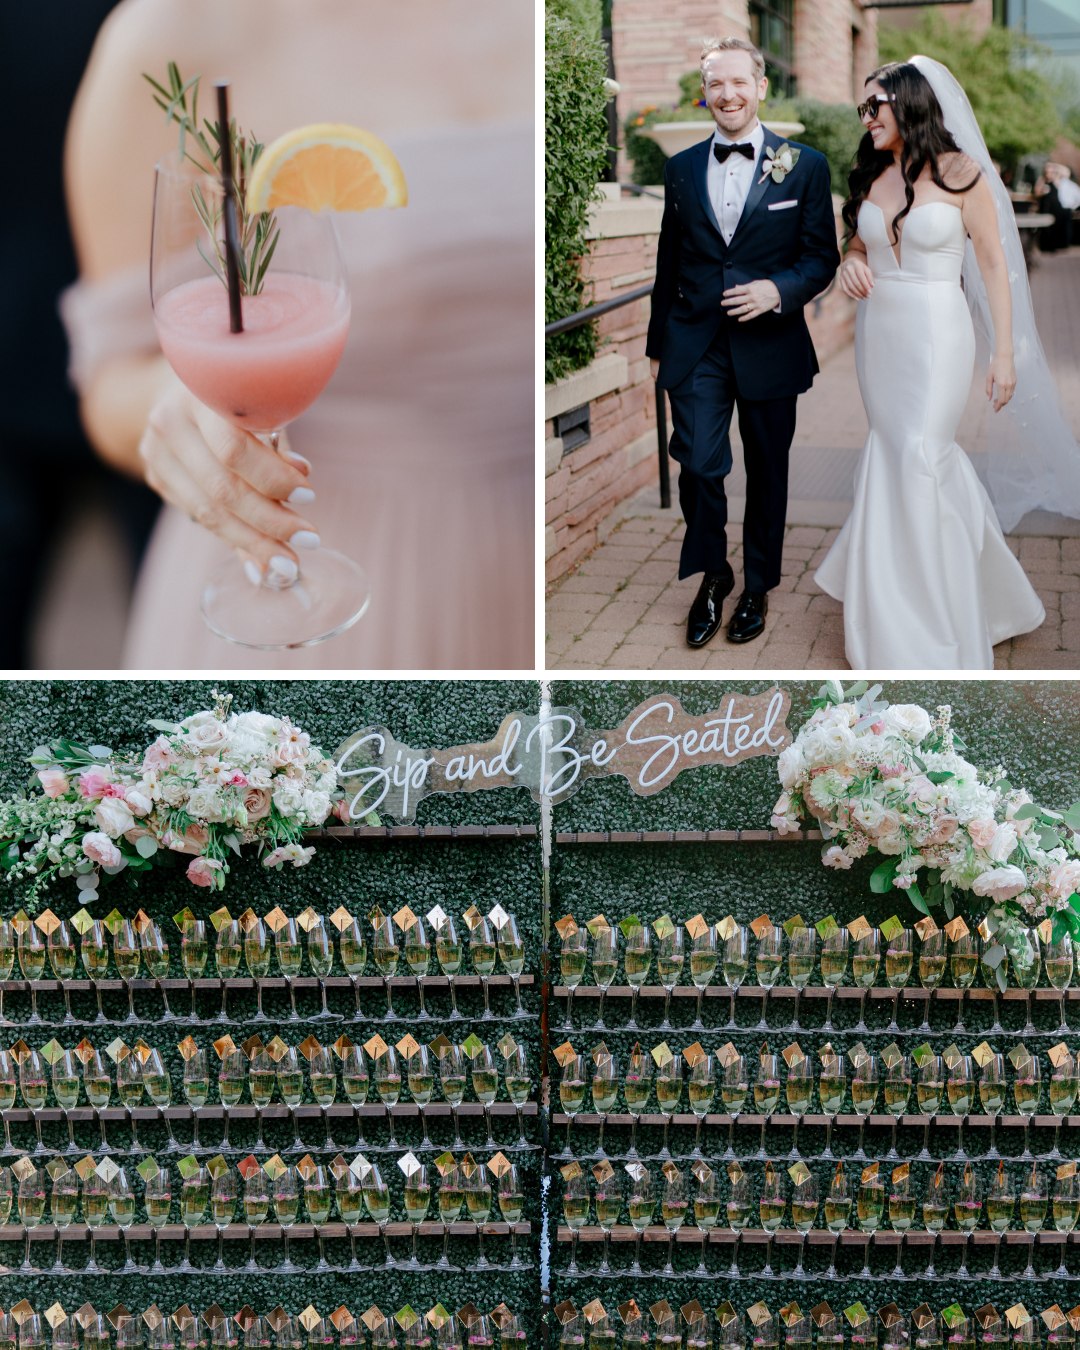 Frozé with rosemary twig, couple walking into reception, champagne wall